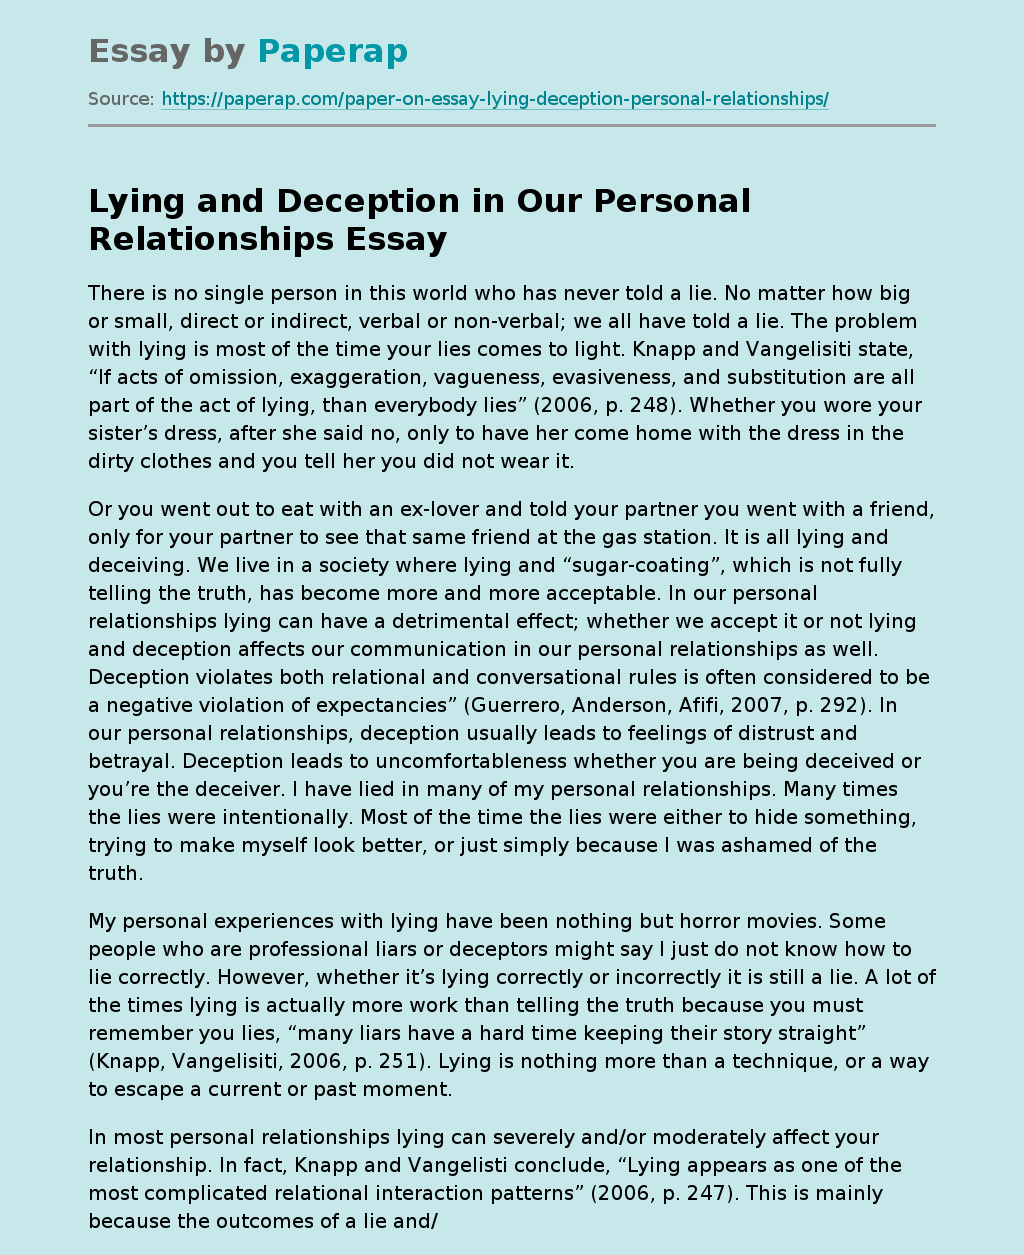 Lying and Deception in Our Personal Relationships